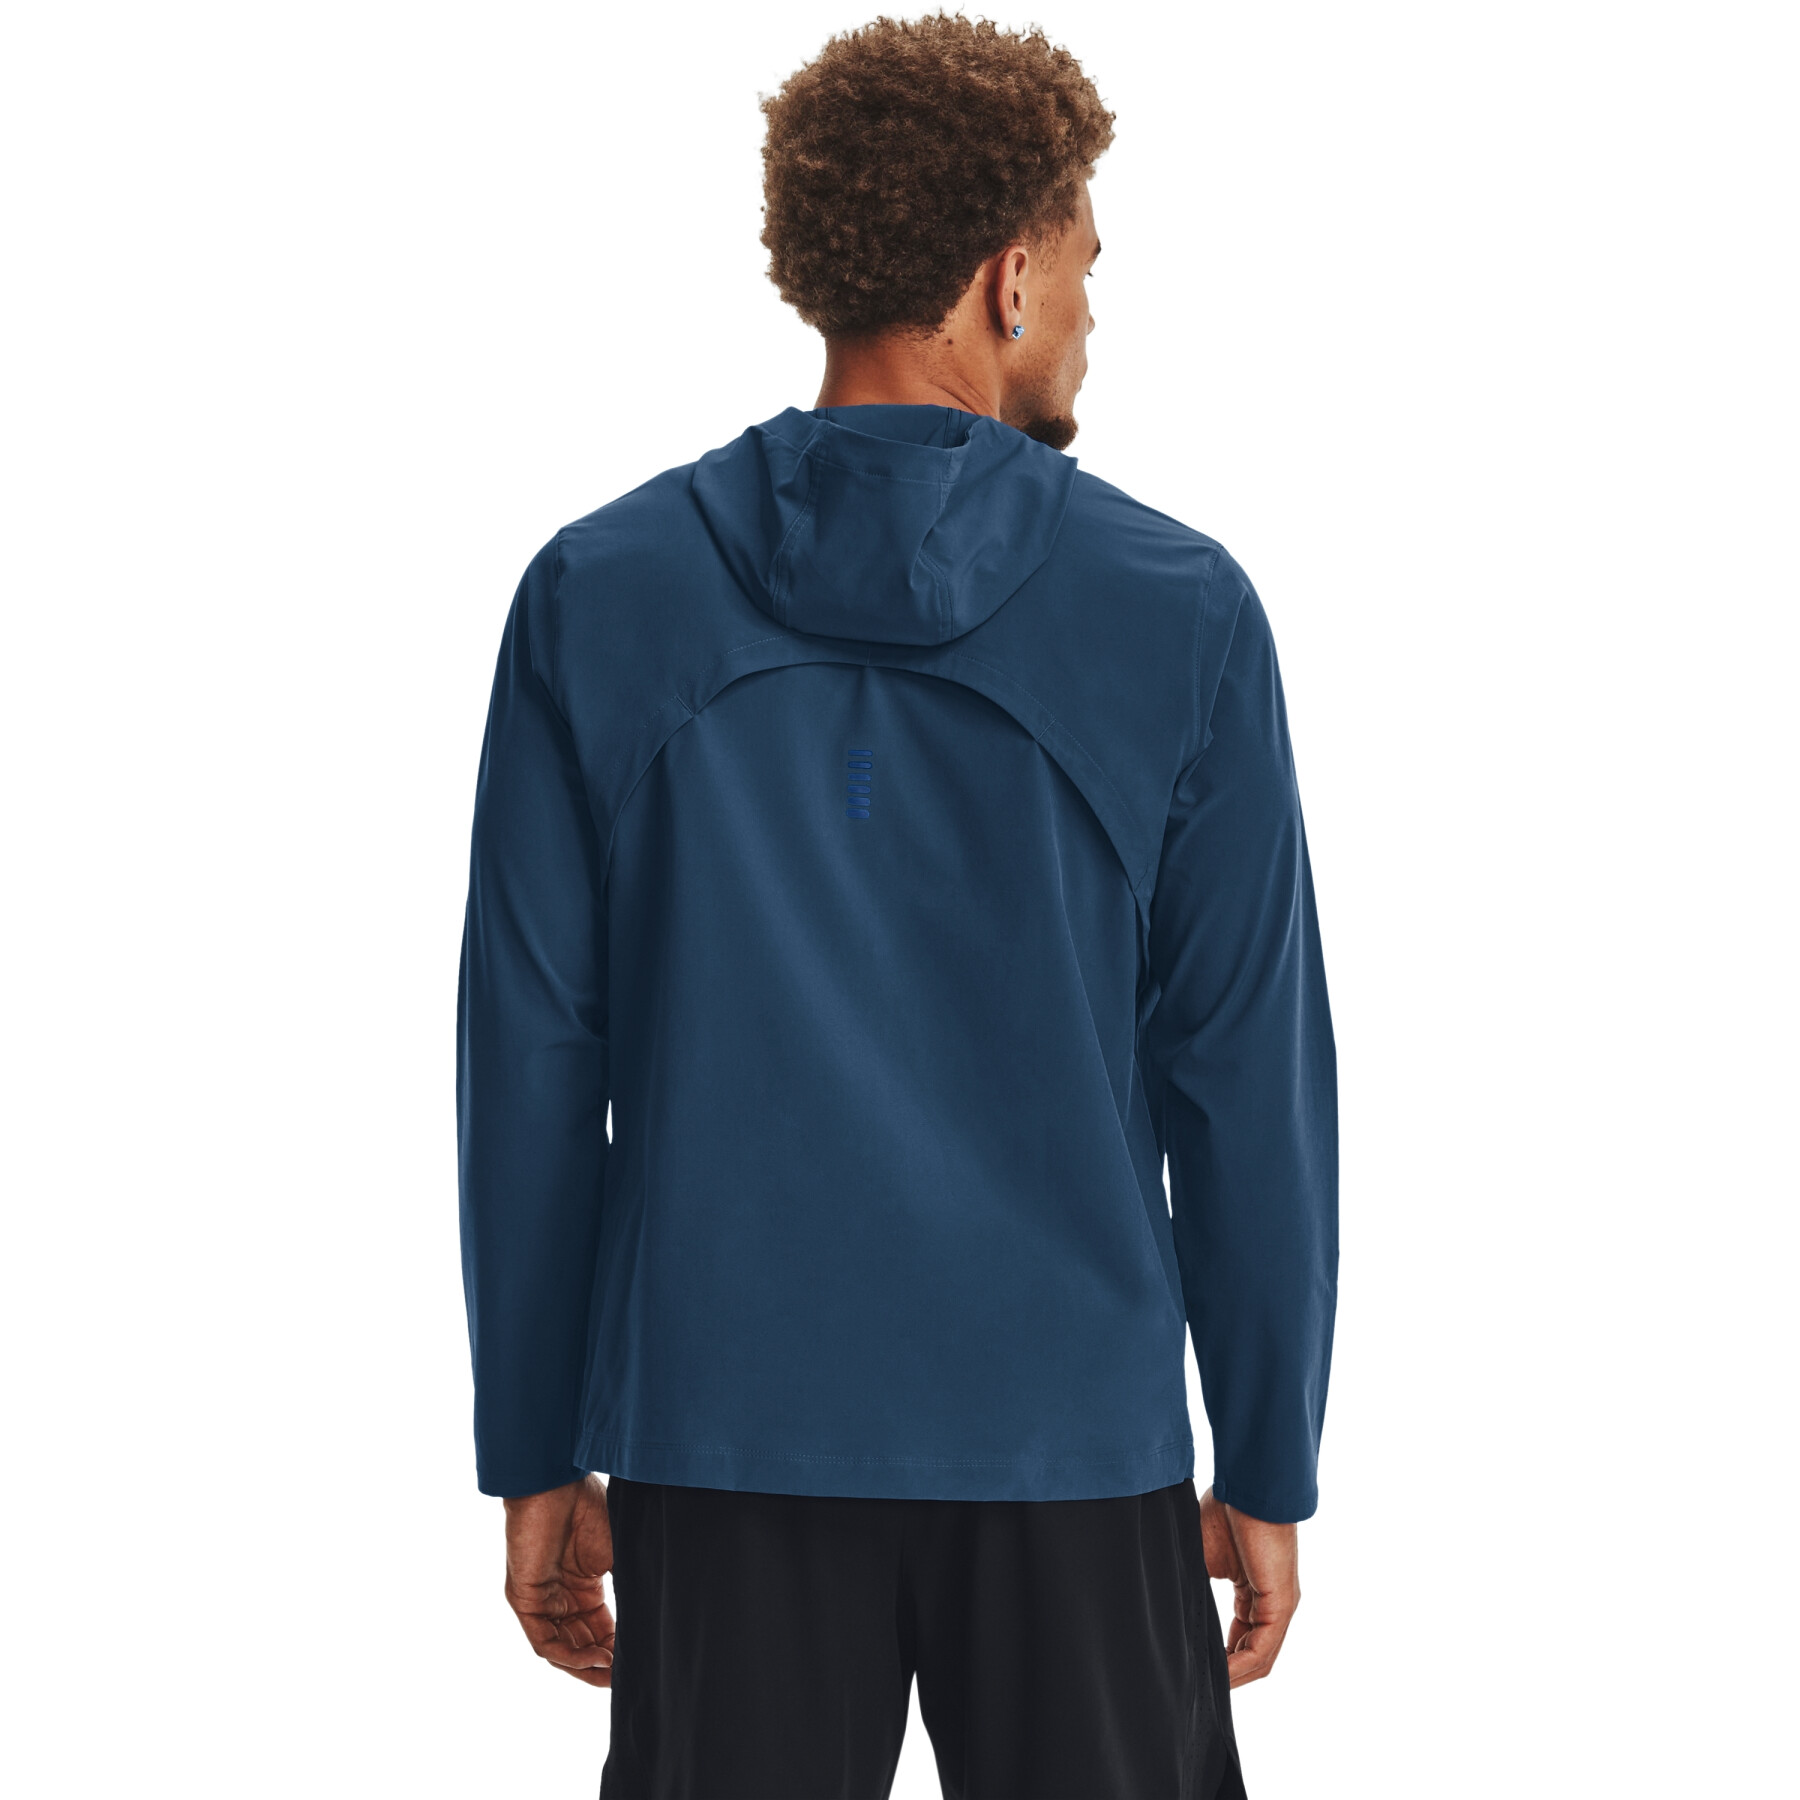 Waterproof jacket Under Armour Outrun